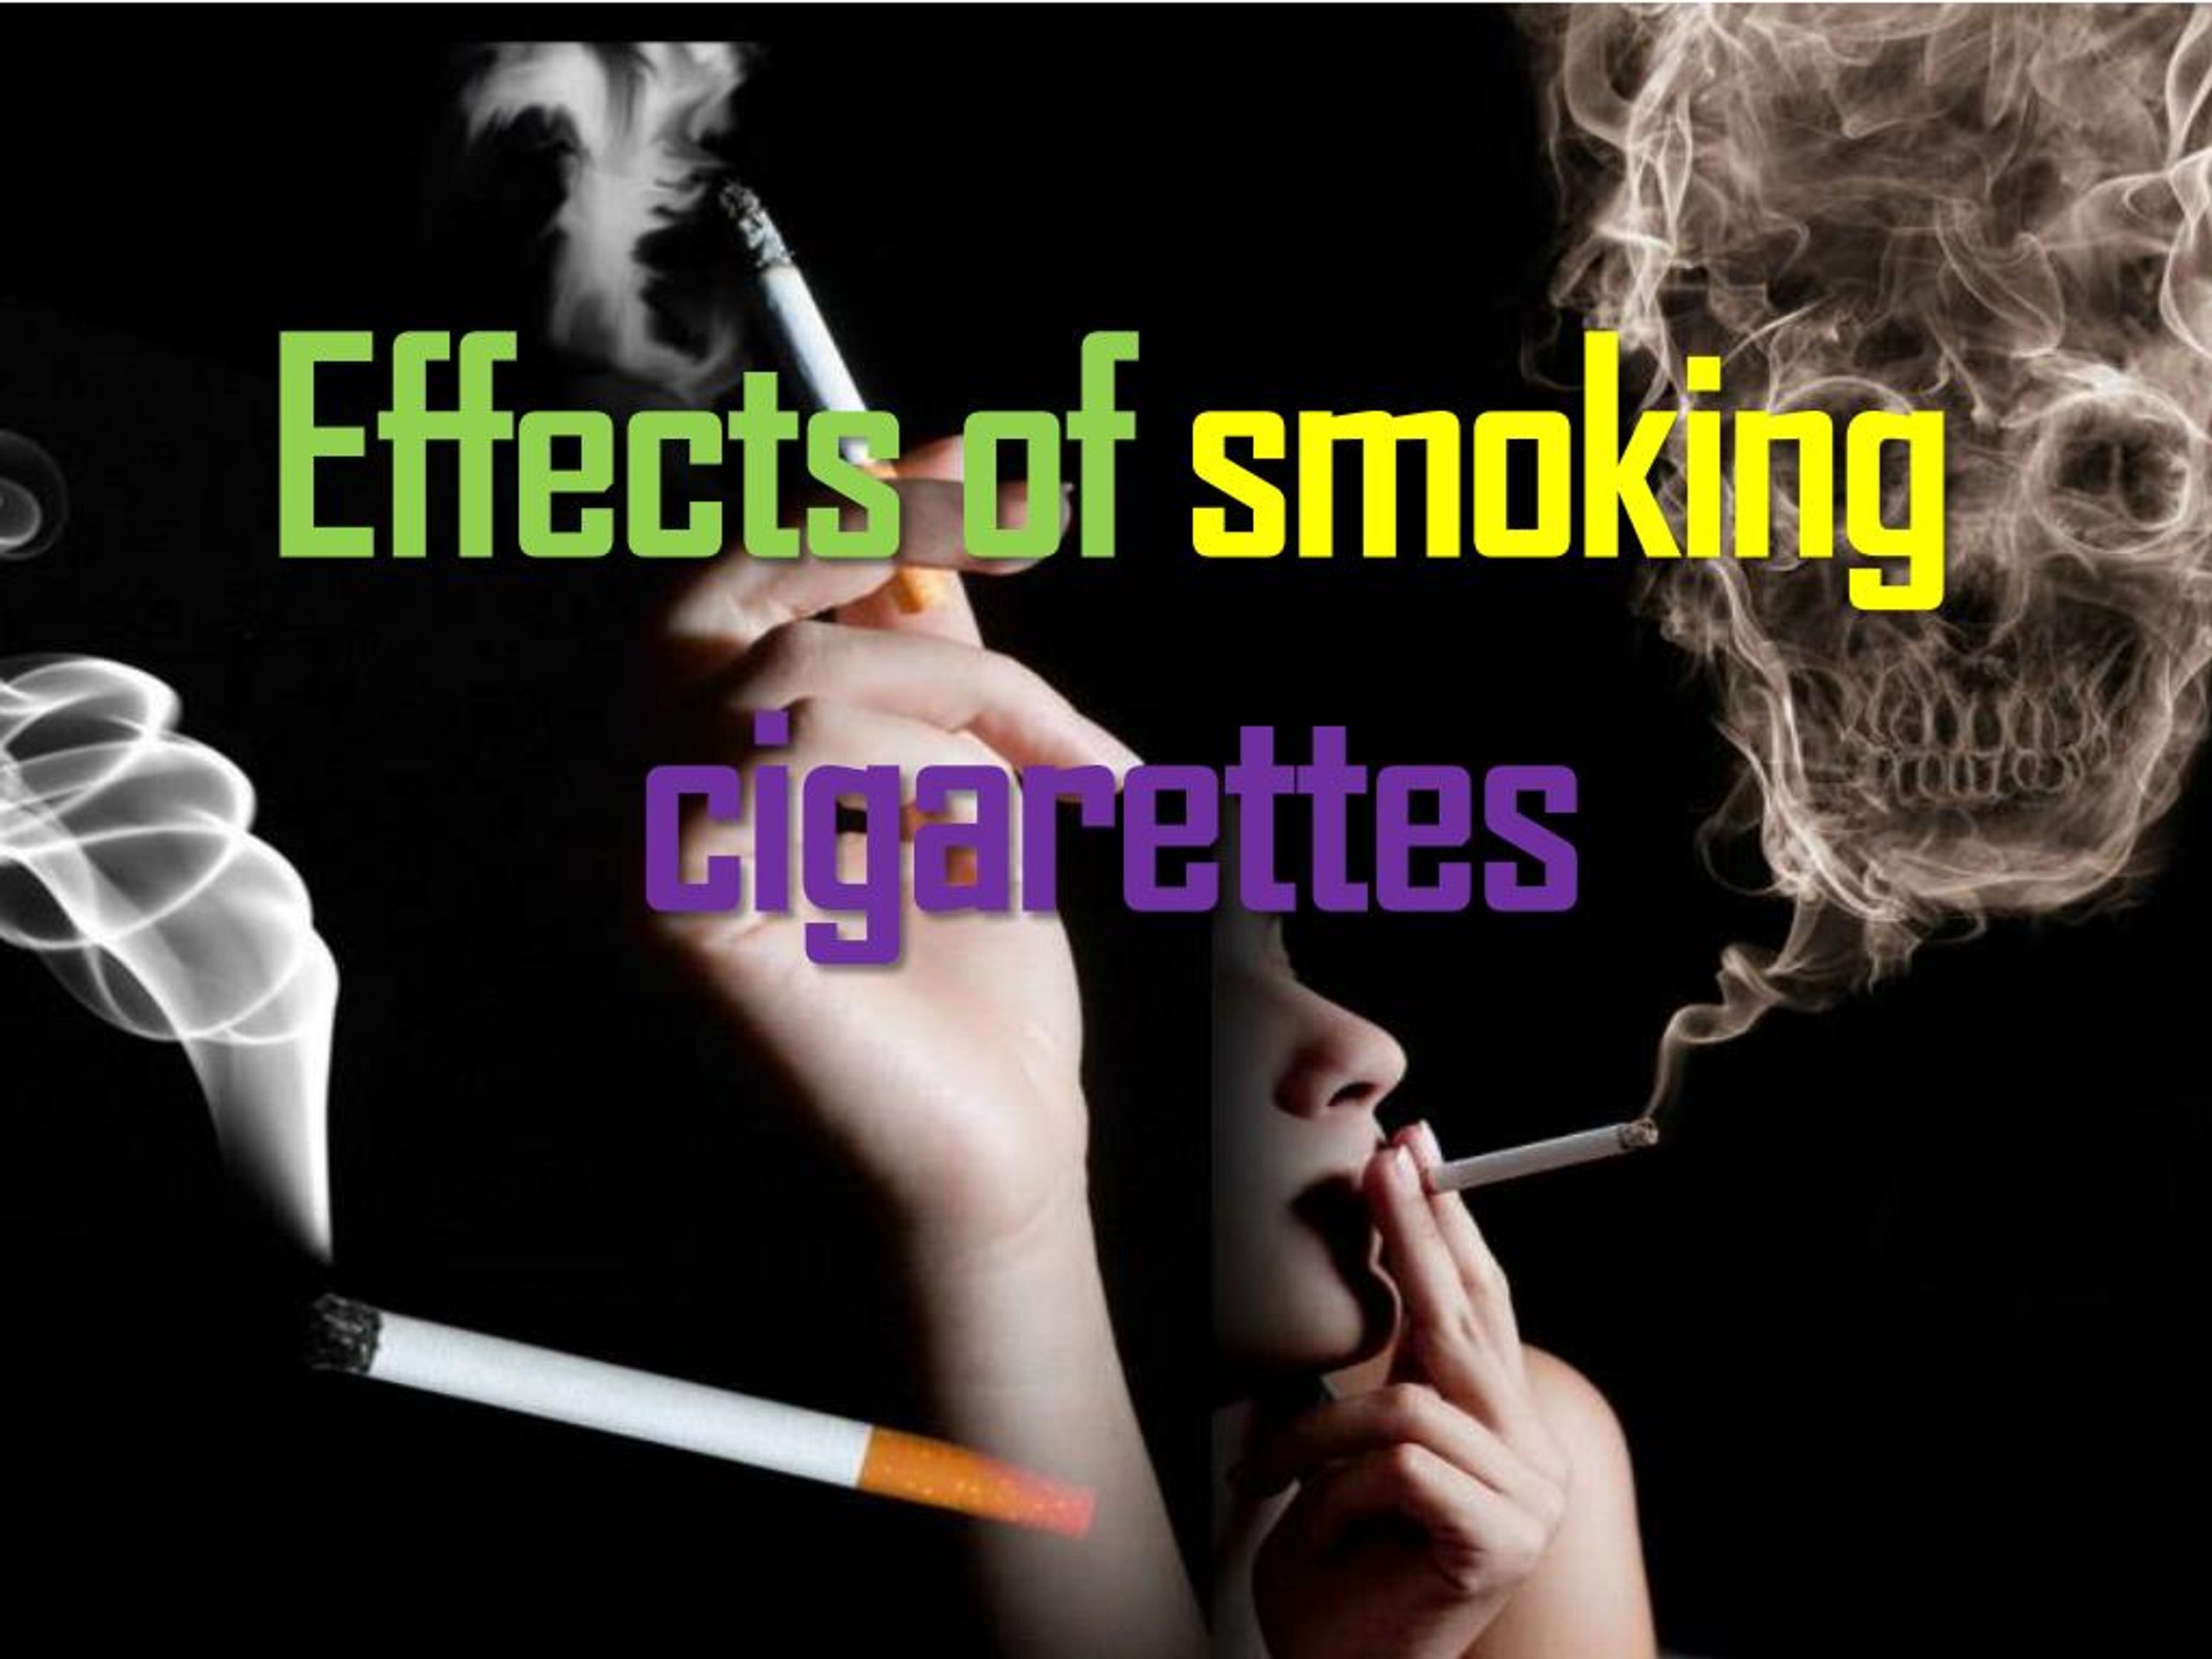 Ppt Effects Of Smoking Cigarettes Powerpoint Presentation Free Download Id 7307639